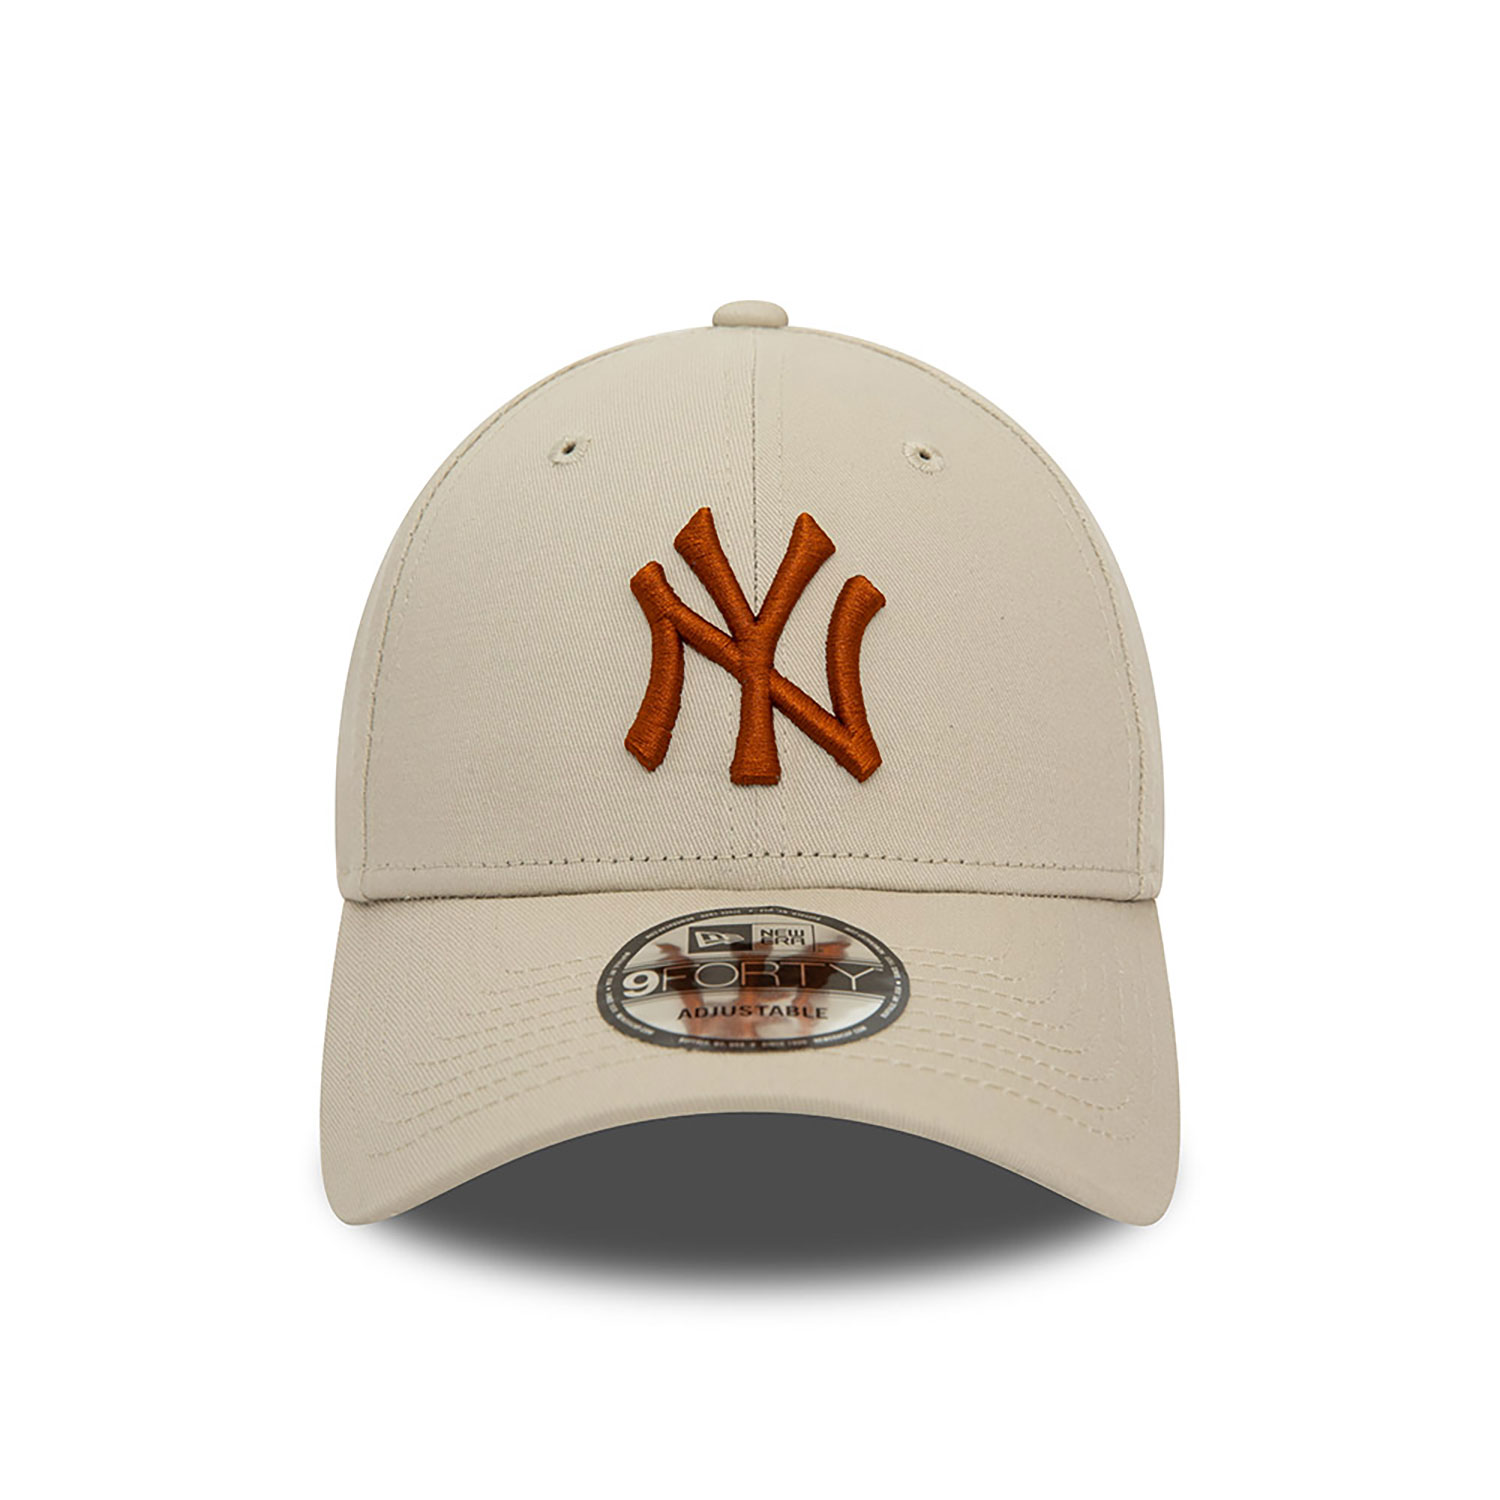 New York Yankees League Essential Stone 9FORTY Adjustable Cap